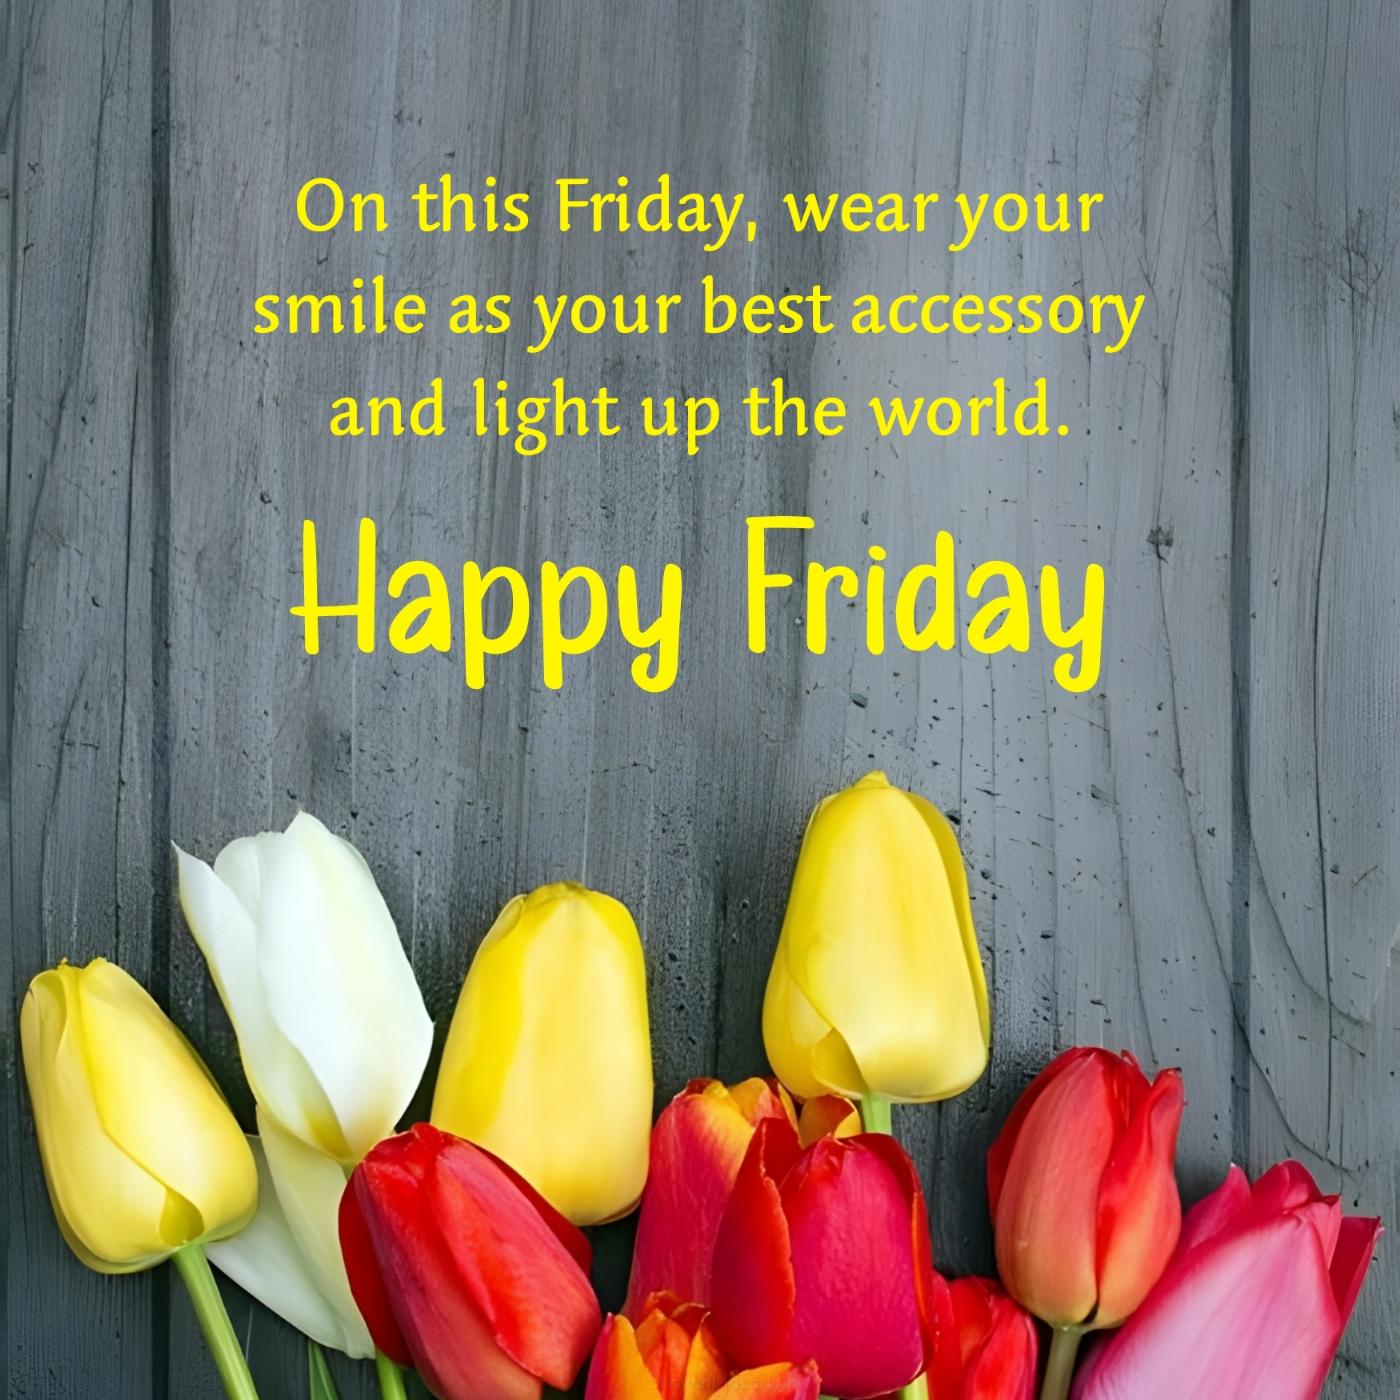 On this Friday wear your smile as your best accessory